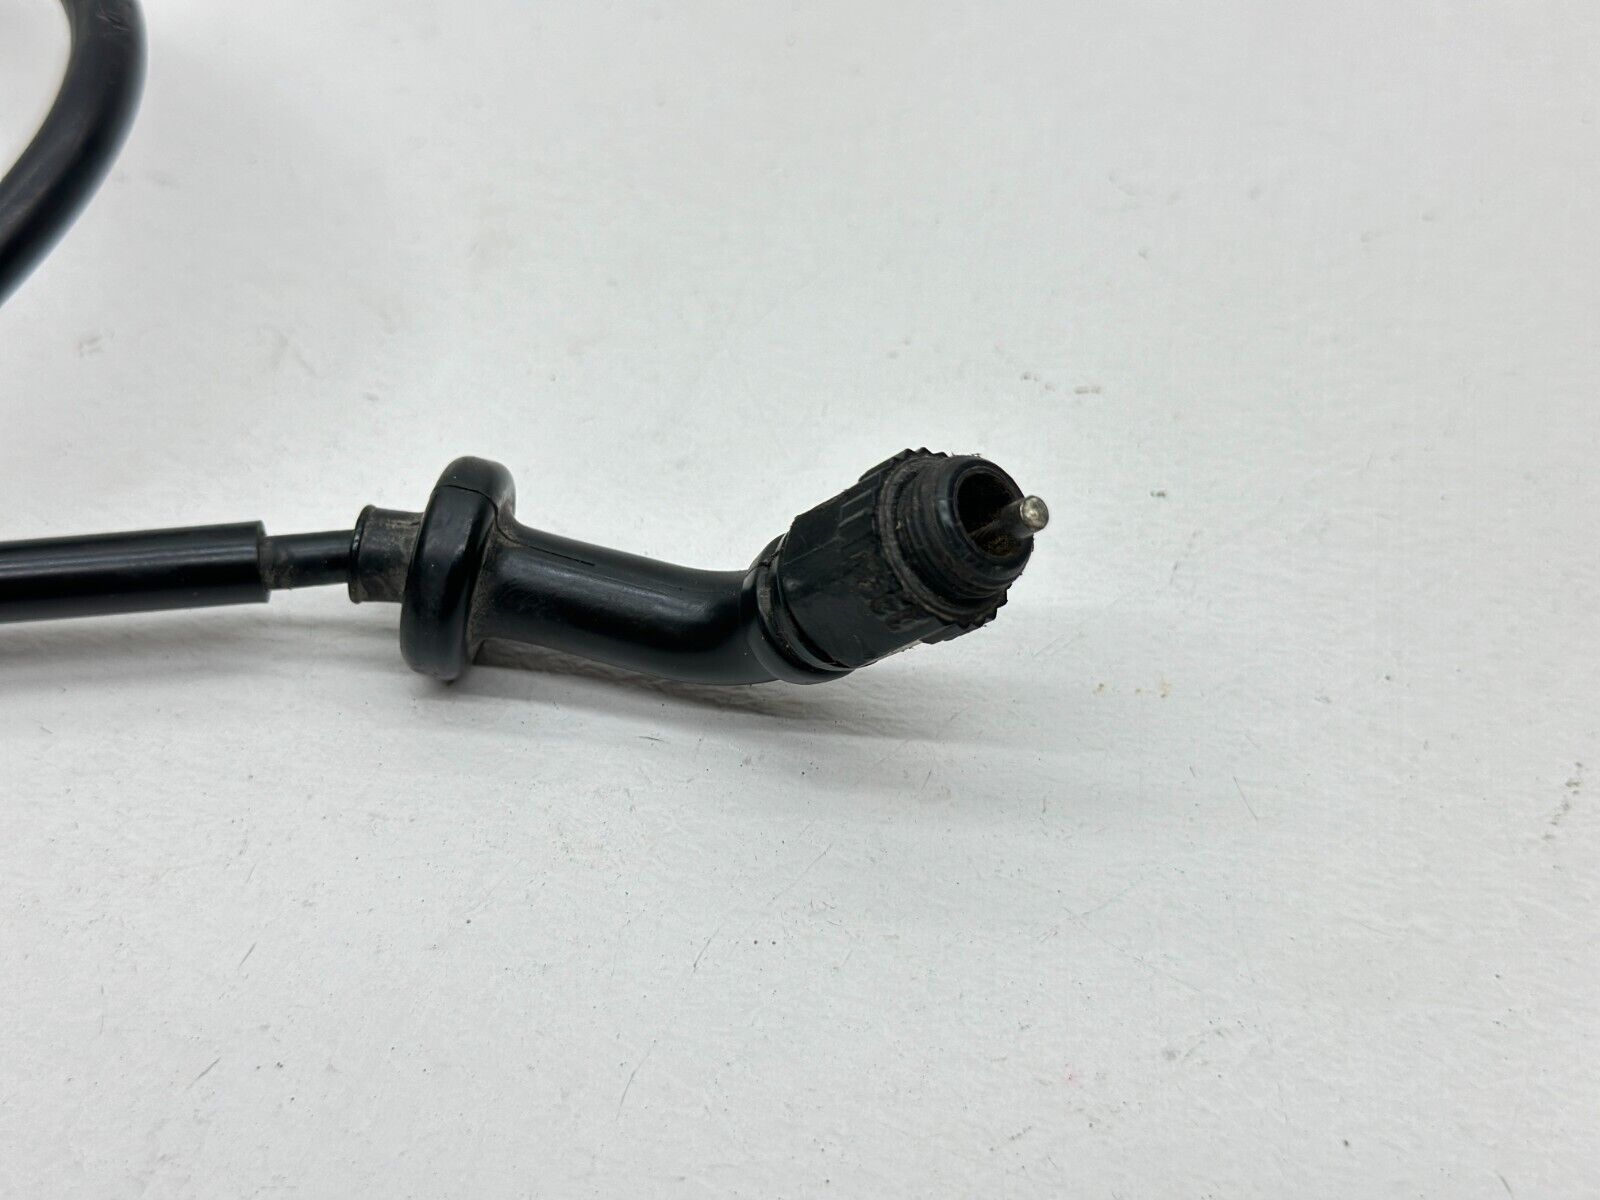 2001 Suzuki RM125 Motorcycle Throttle Cable Assembly 58300-37F01 Black RM 125